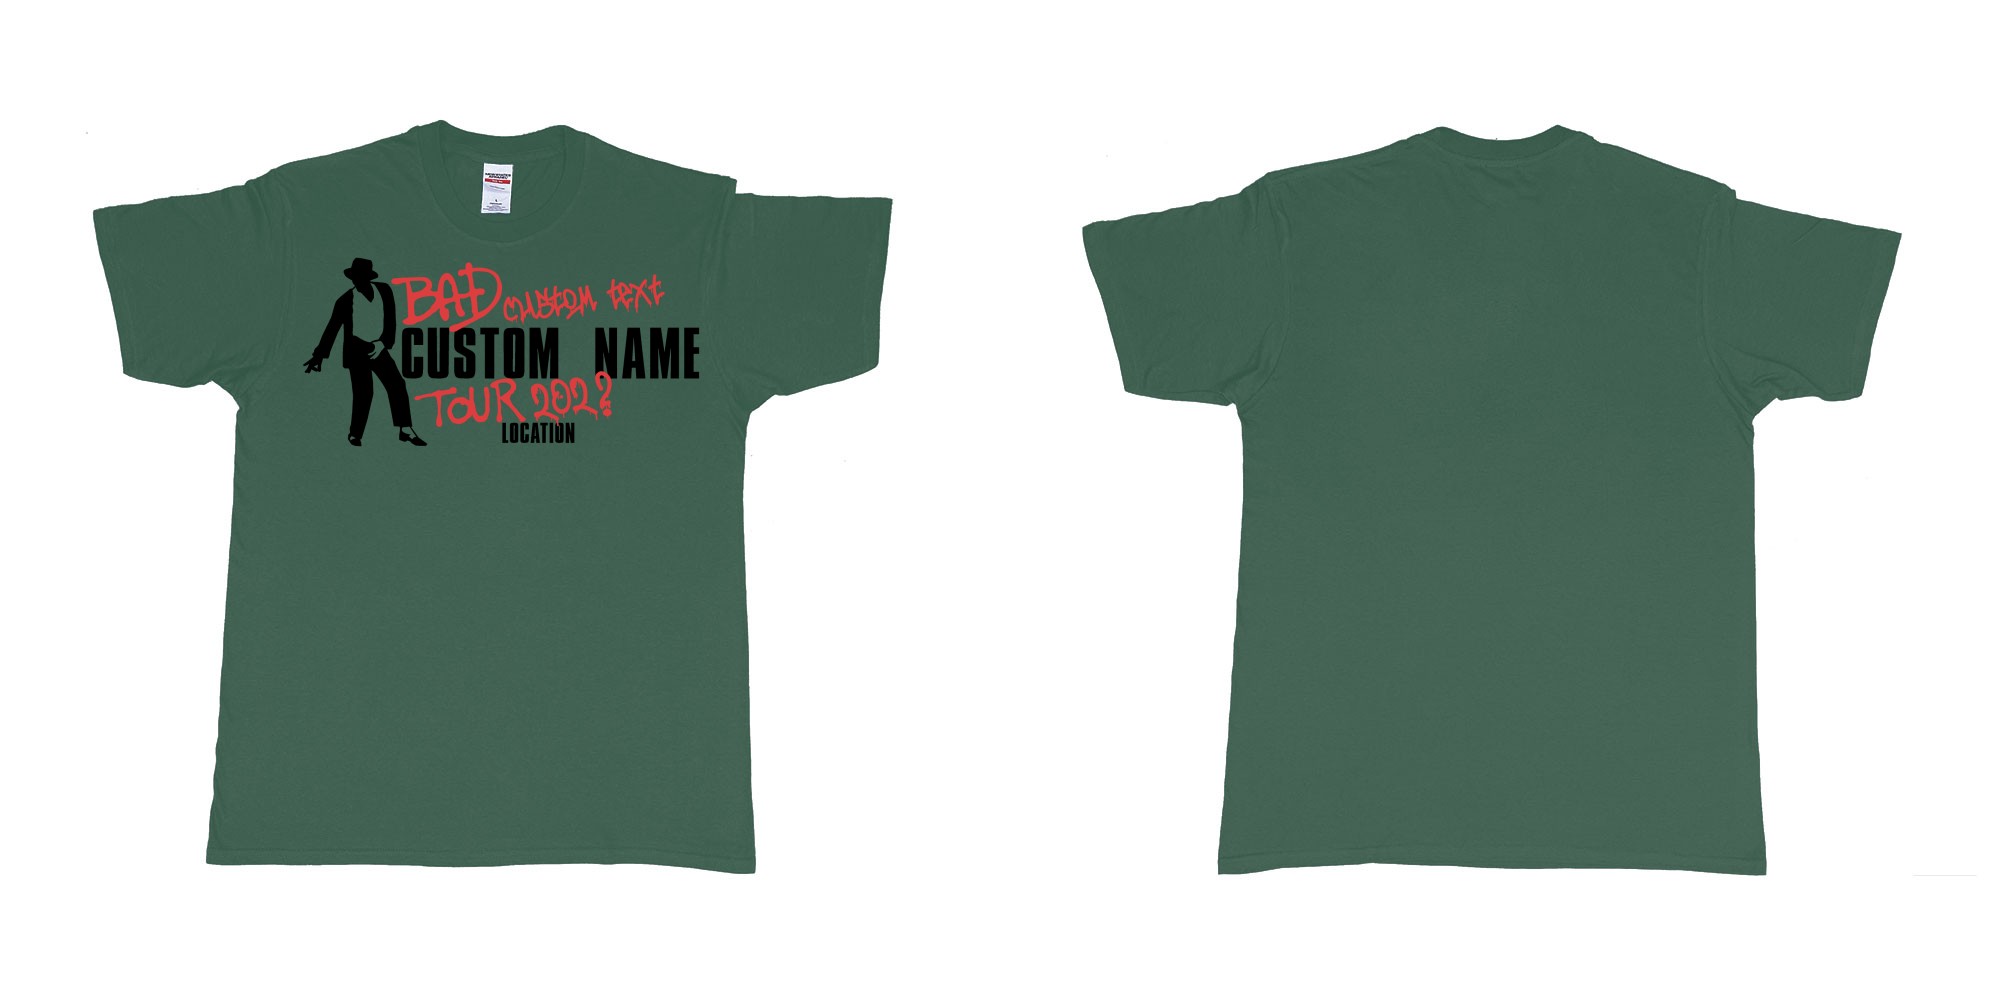 Custom tshirt design michael jackson bad tour custom name year location in fabric color forest-green choice your own text made in Bali by The Pirate Way